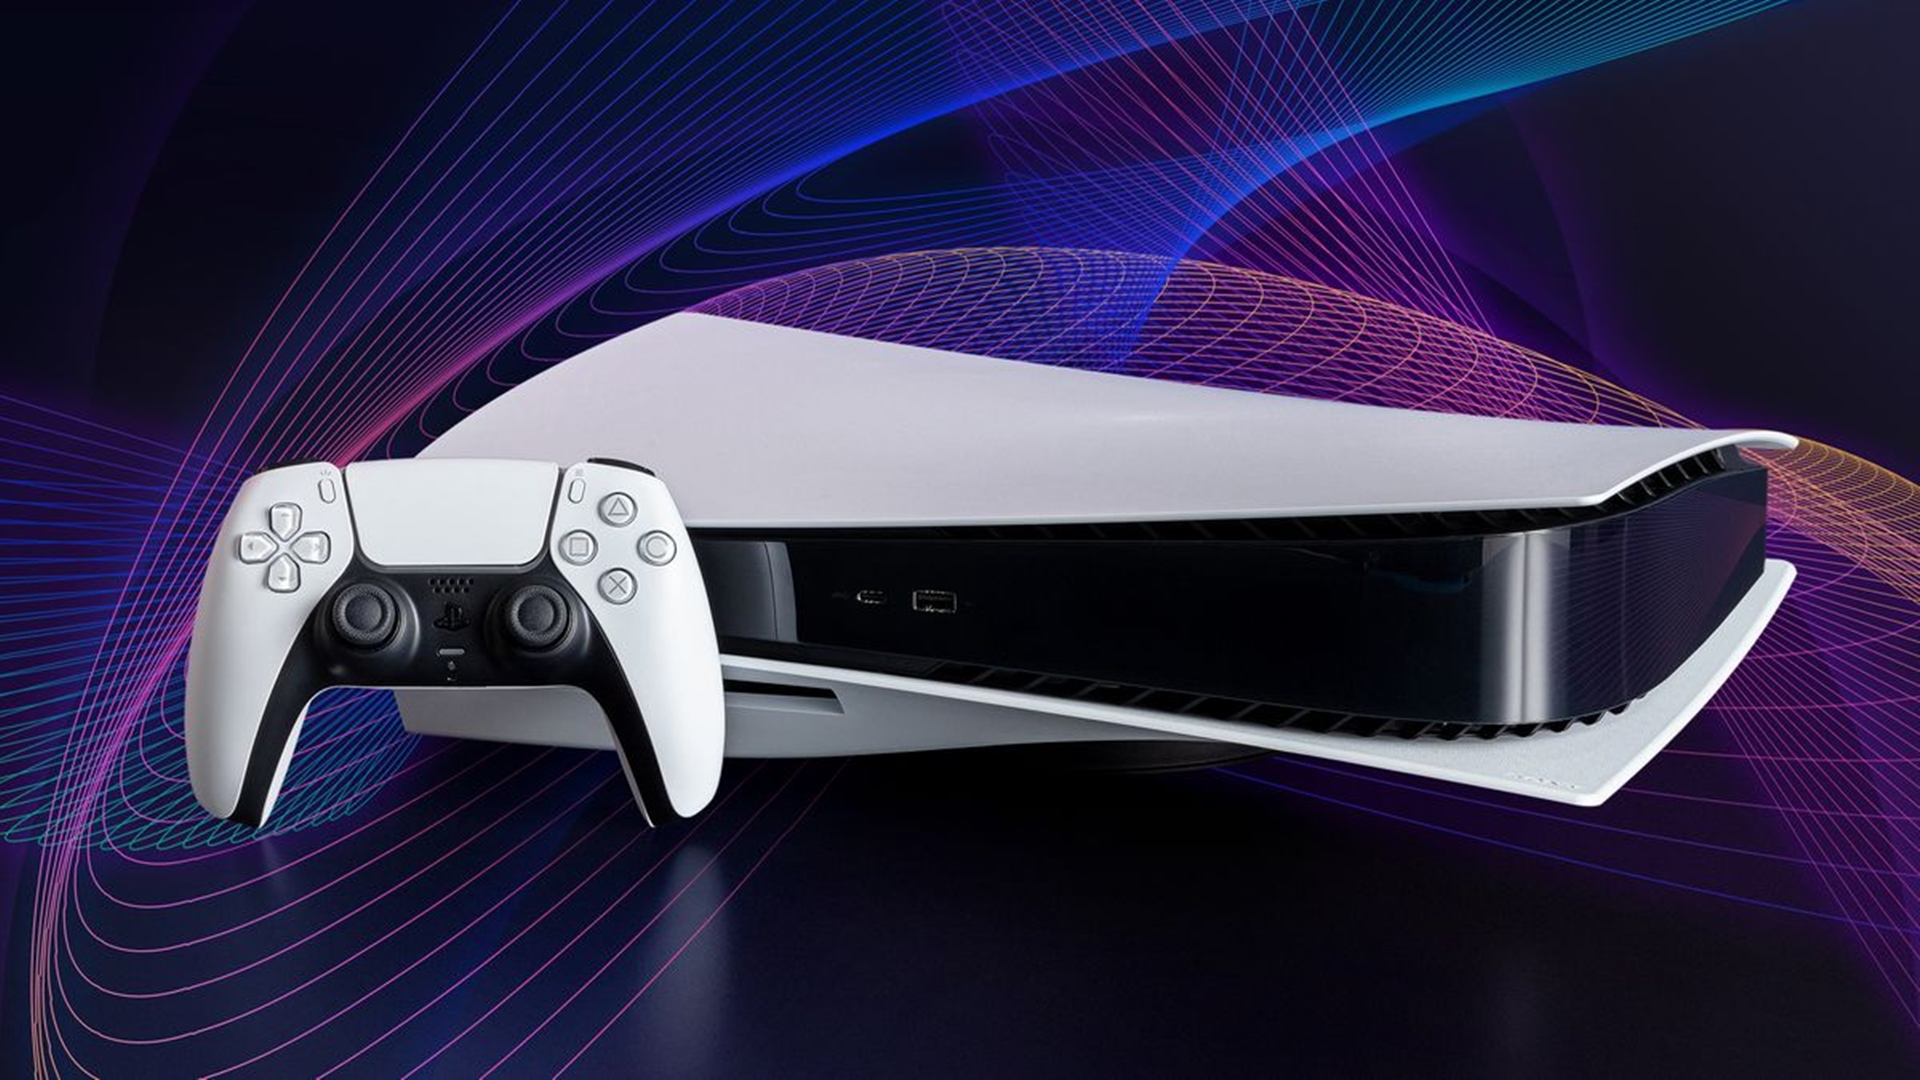 Sony has sold almost 60 million PS5 units since the console's launch in November 2020.